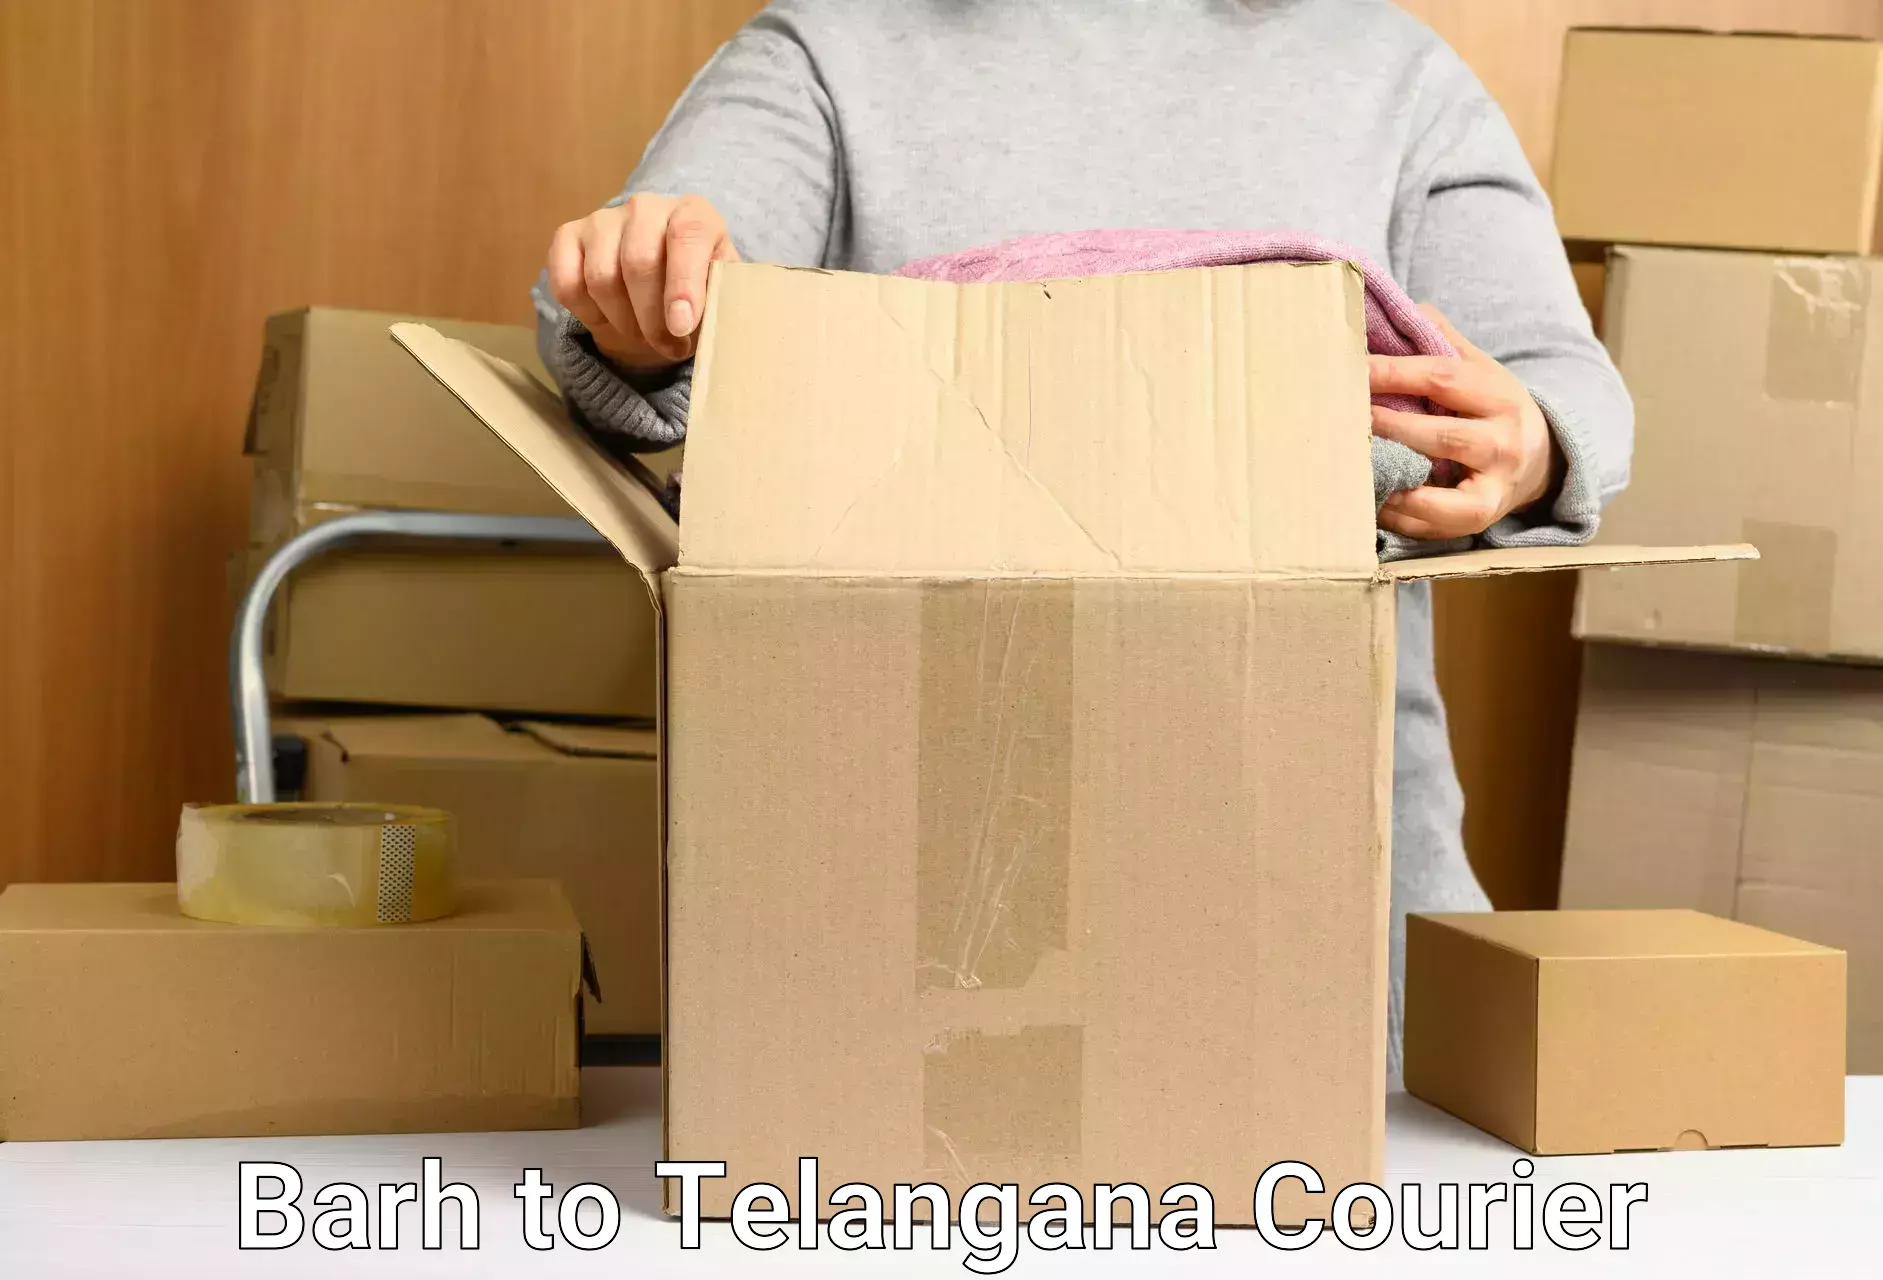 Multi-service courier options Barh to Telangana